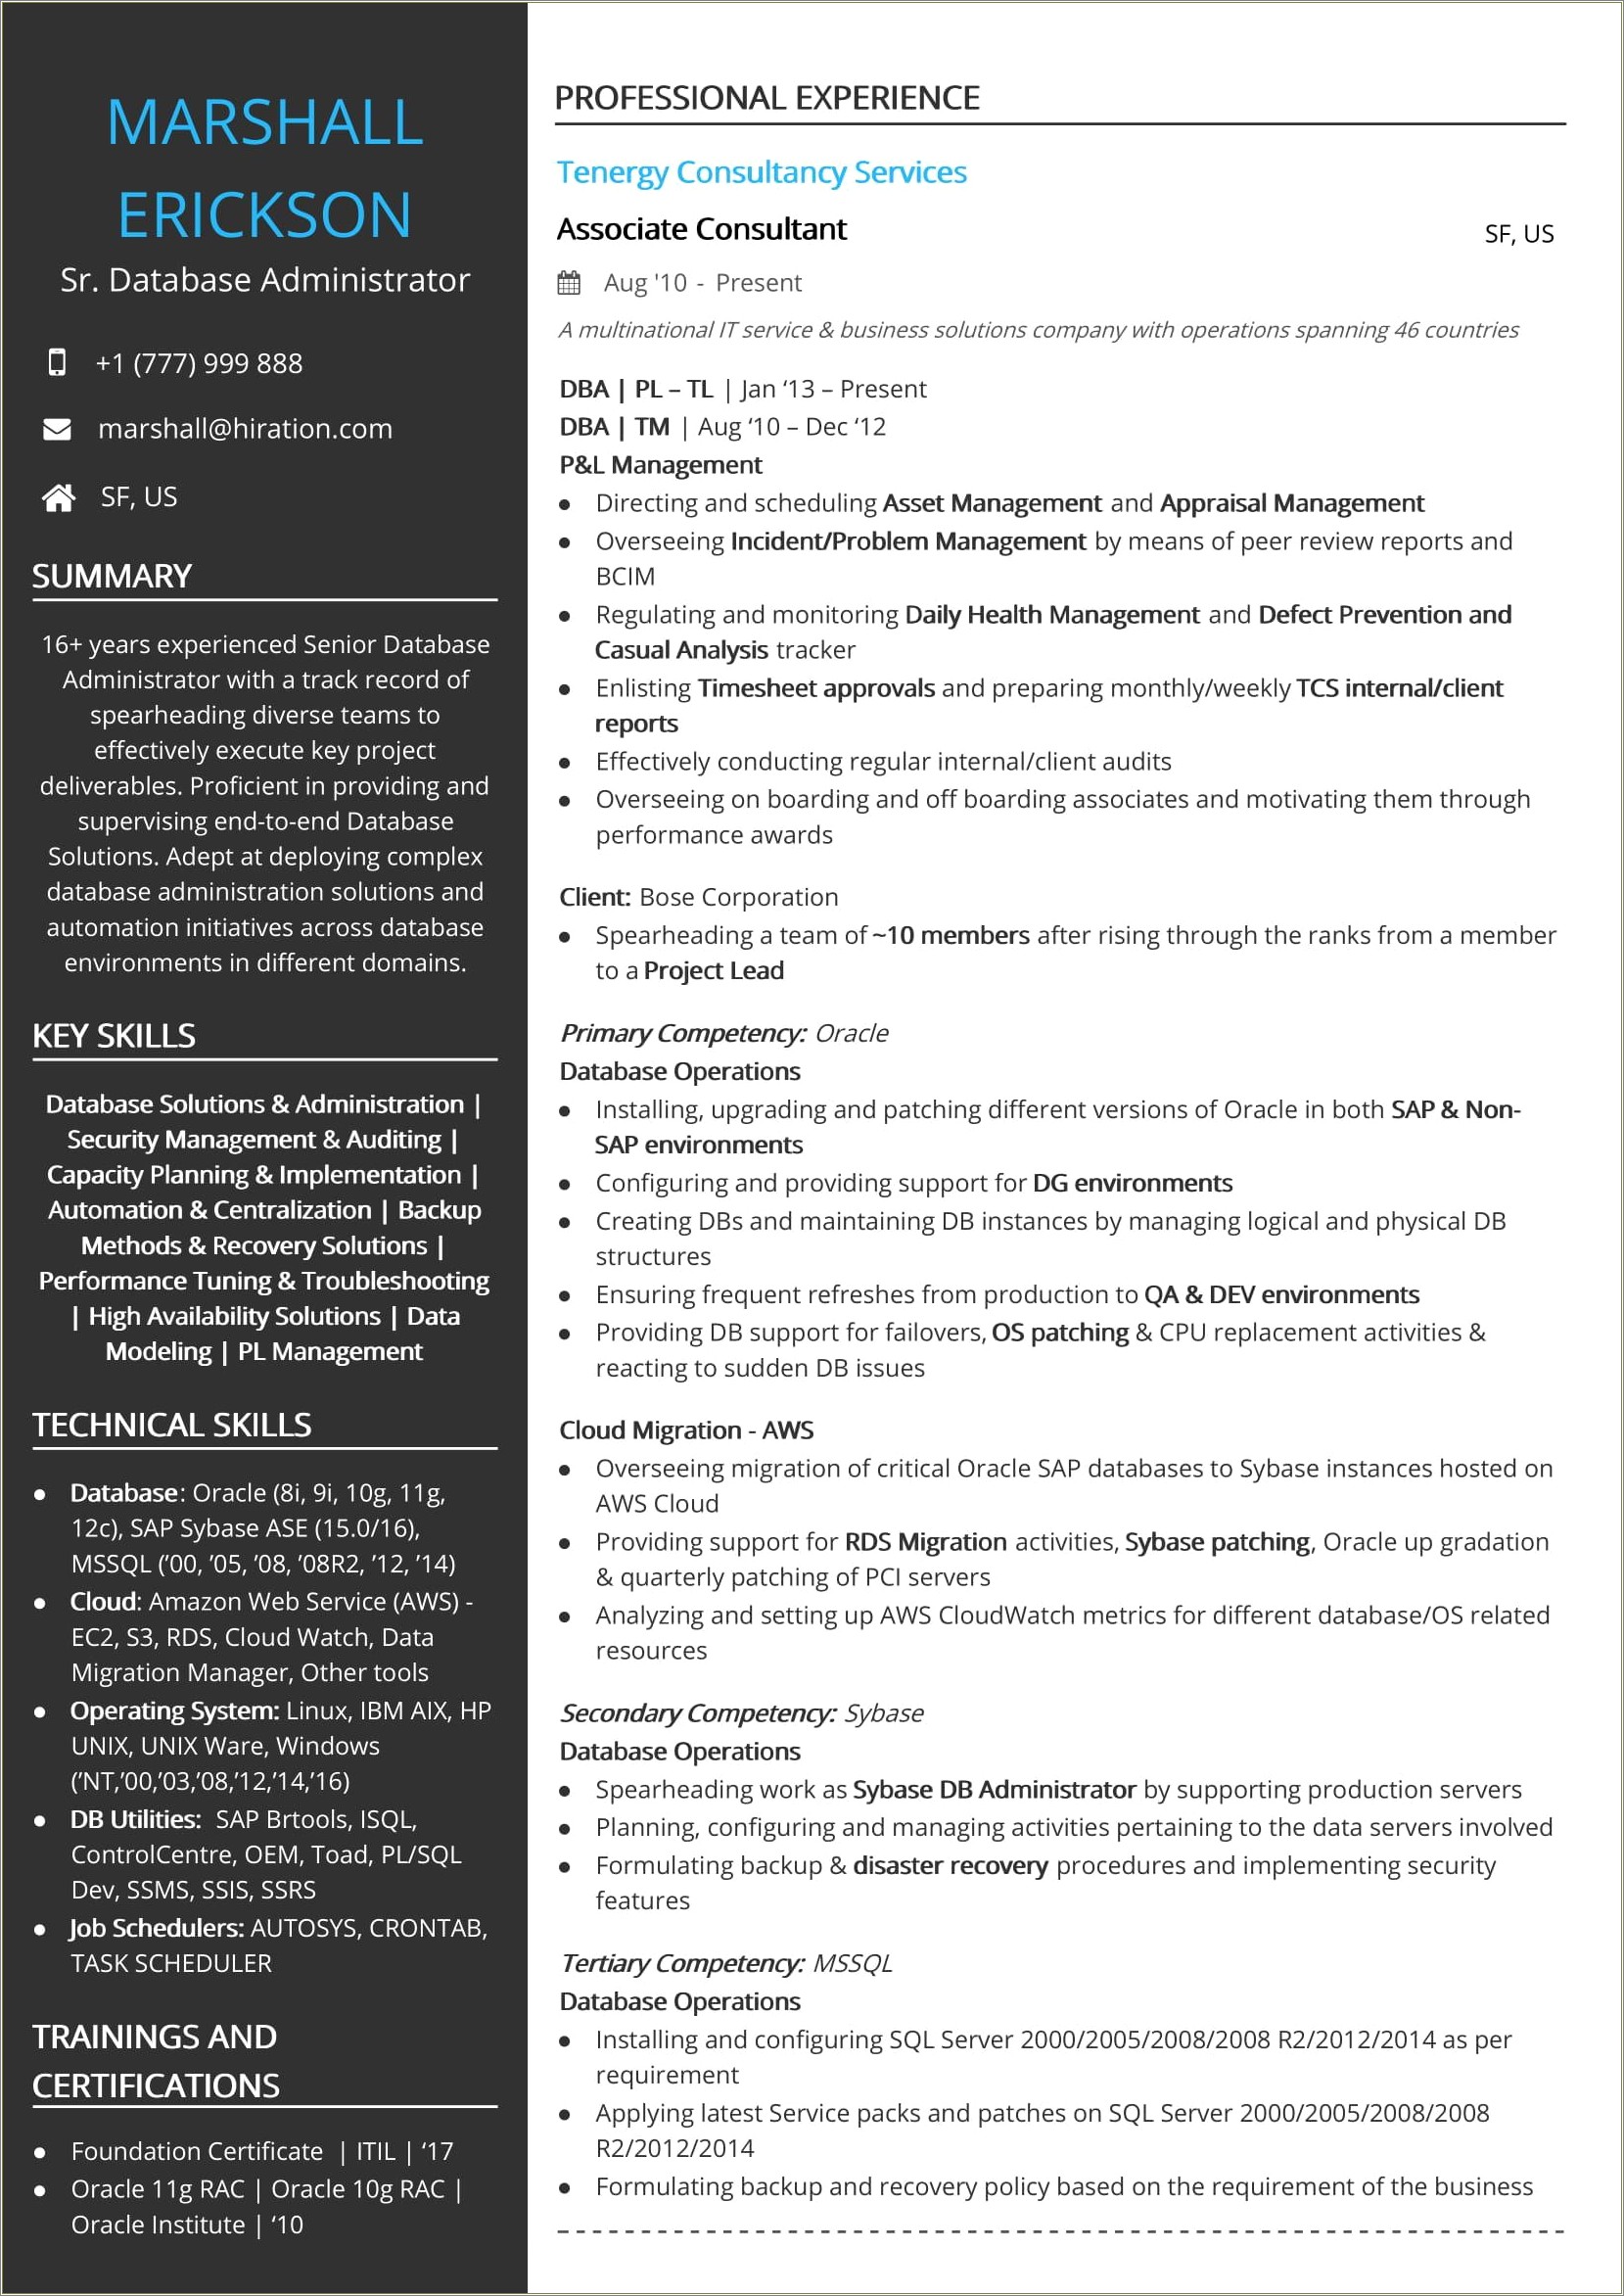 Linux Administrator Resume 8 Years Experience